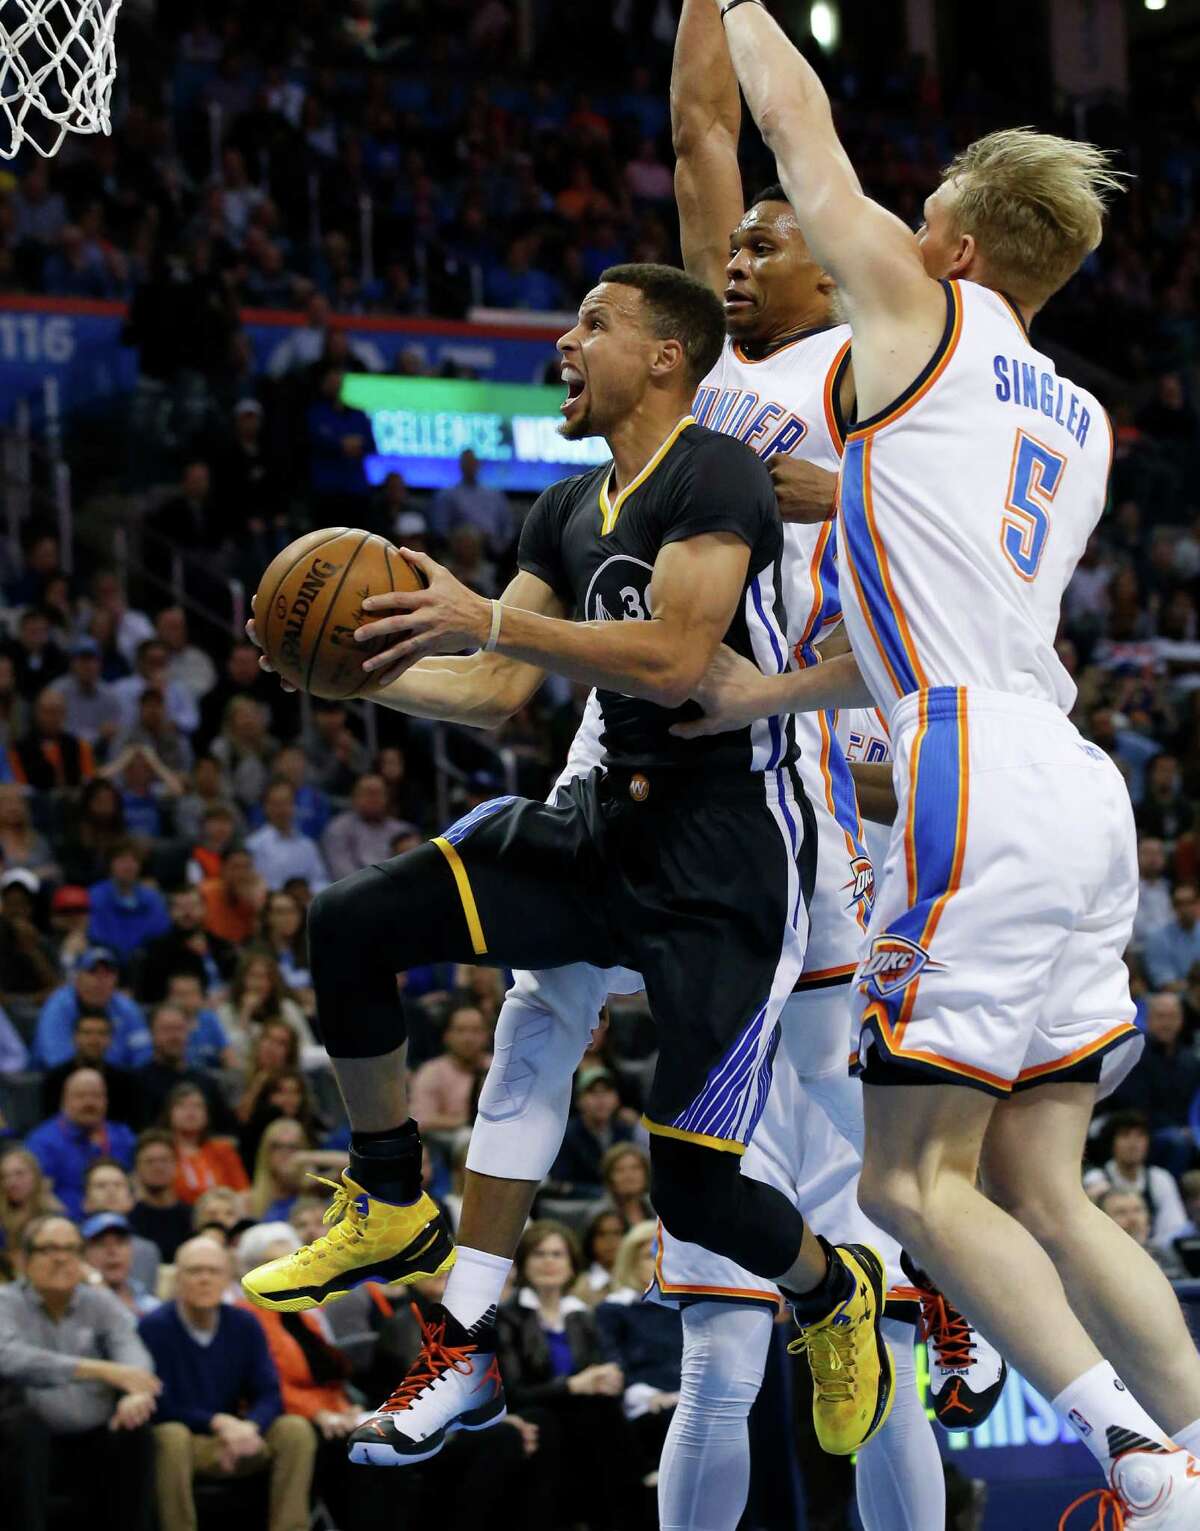 Golden State Warriors guard Stephen Curry, left, goes up for a shot in front of Oklahoma City Thunder forward Kevin Durant, center, and forward Kyle Singler (5) during the first quarter of an NBA basketball game in Oklahoma City, Saturday, Feb. 27, 2016. (AP Photo/Sue Ogrocki)